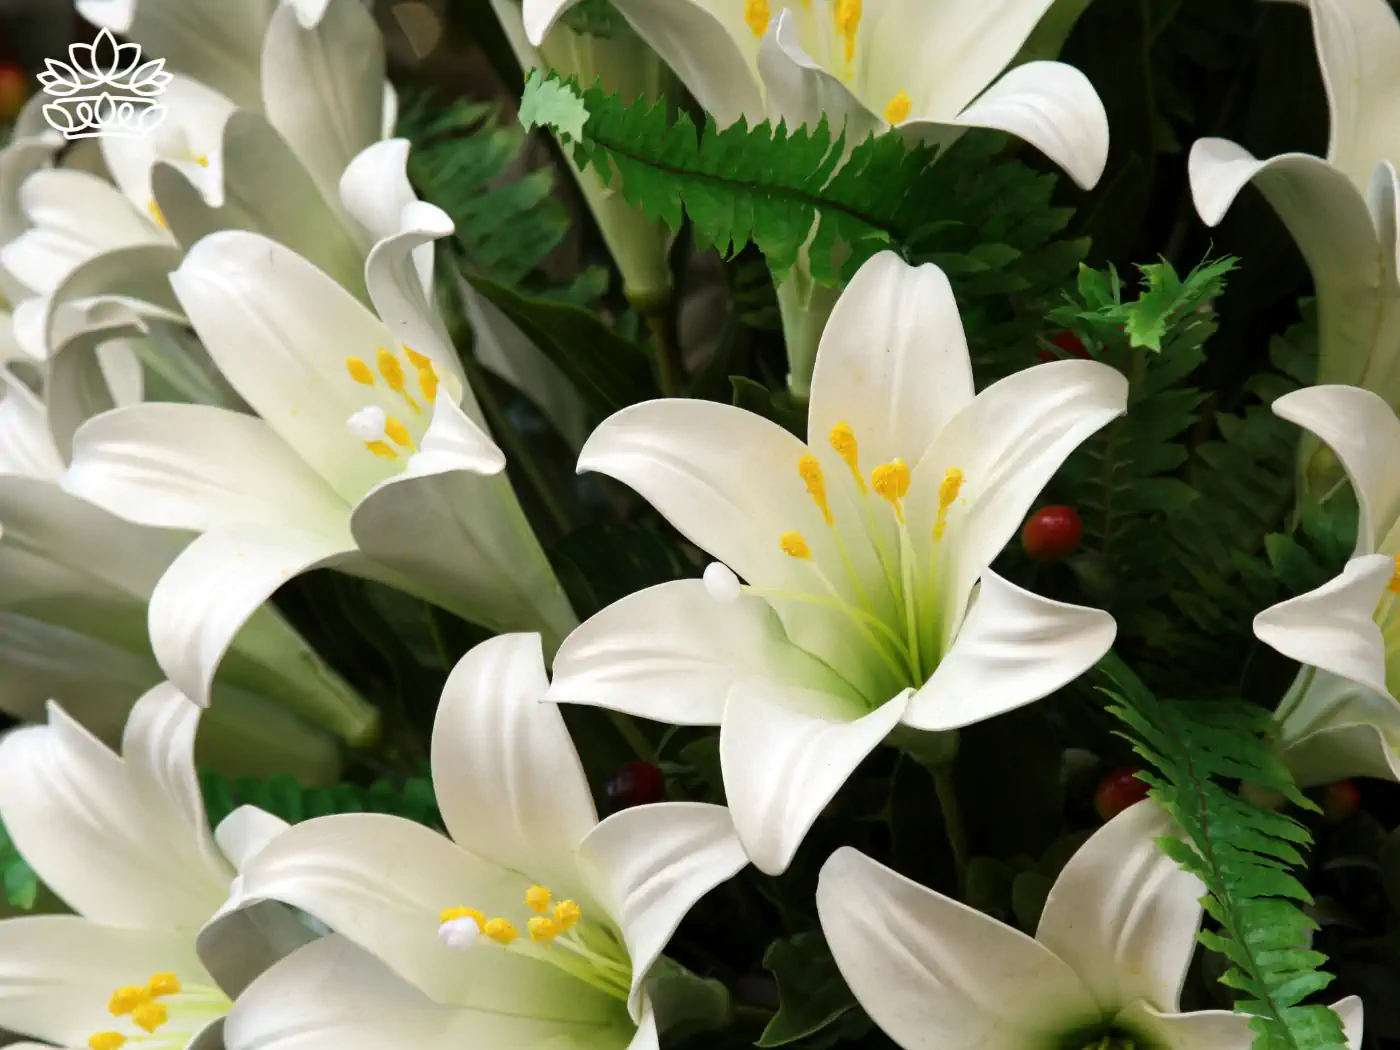 **Elegant white stargazer lilies in bloom, accented by green foliage and yellow stamen. Fabulous Flowers and Gifts.**